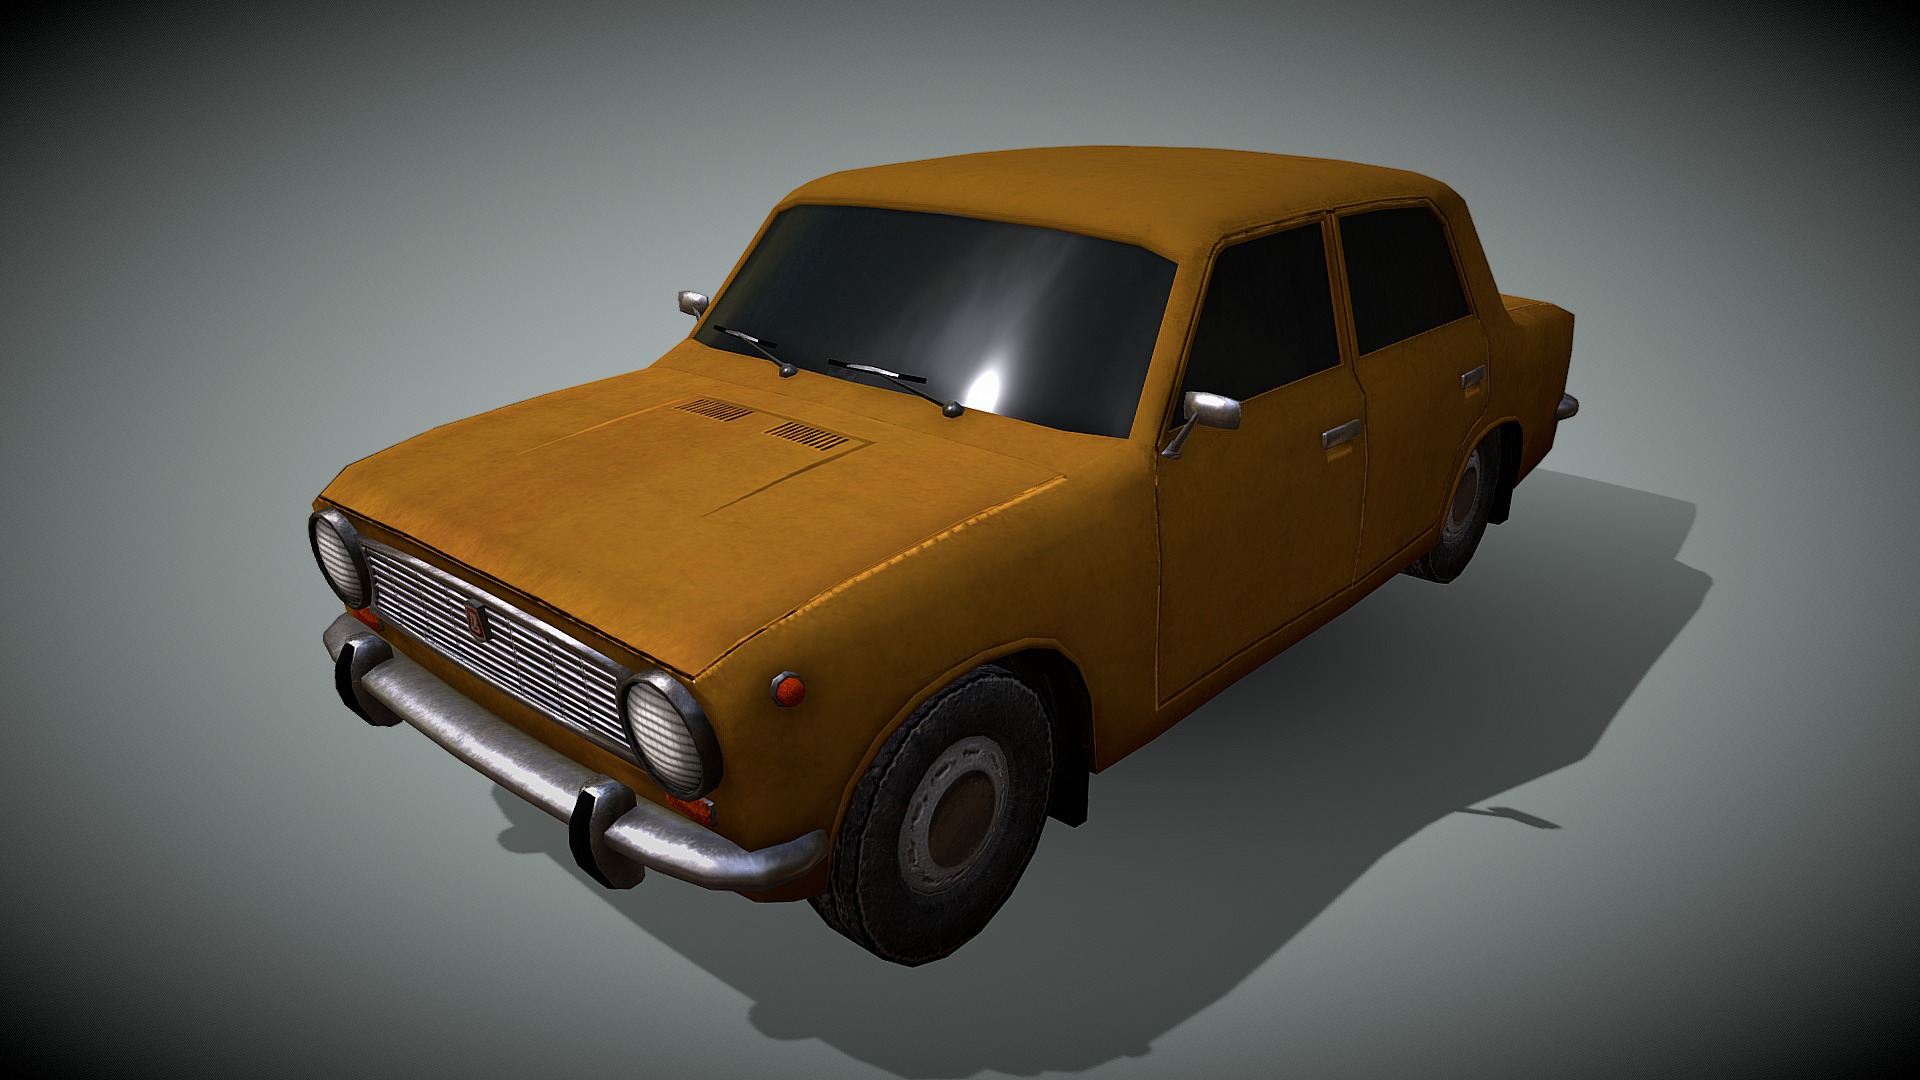 3D model VAZ 2101 - This is a 3D model of the VAZ 2101. The 3D model is about a small yellow car.